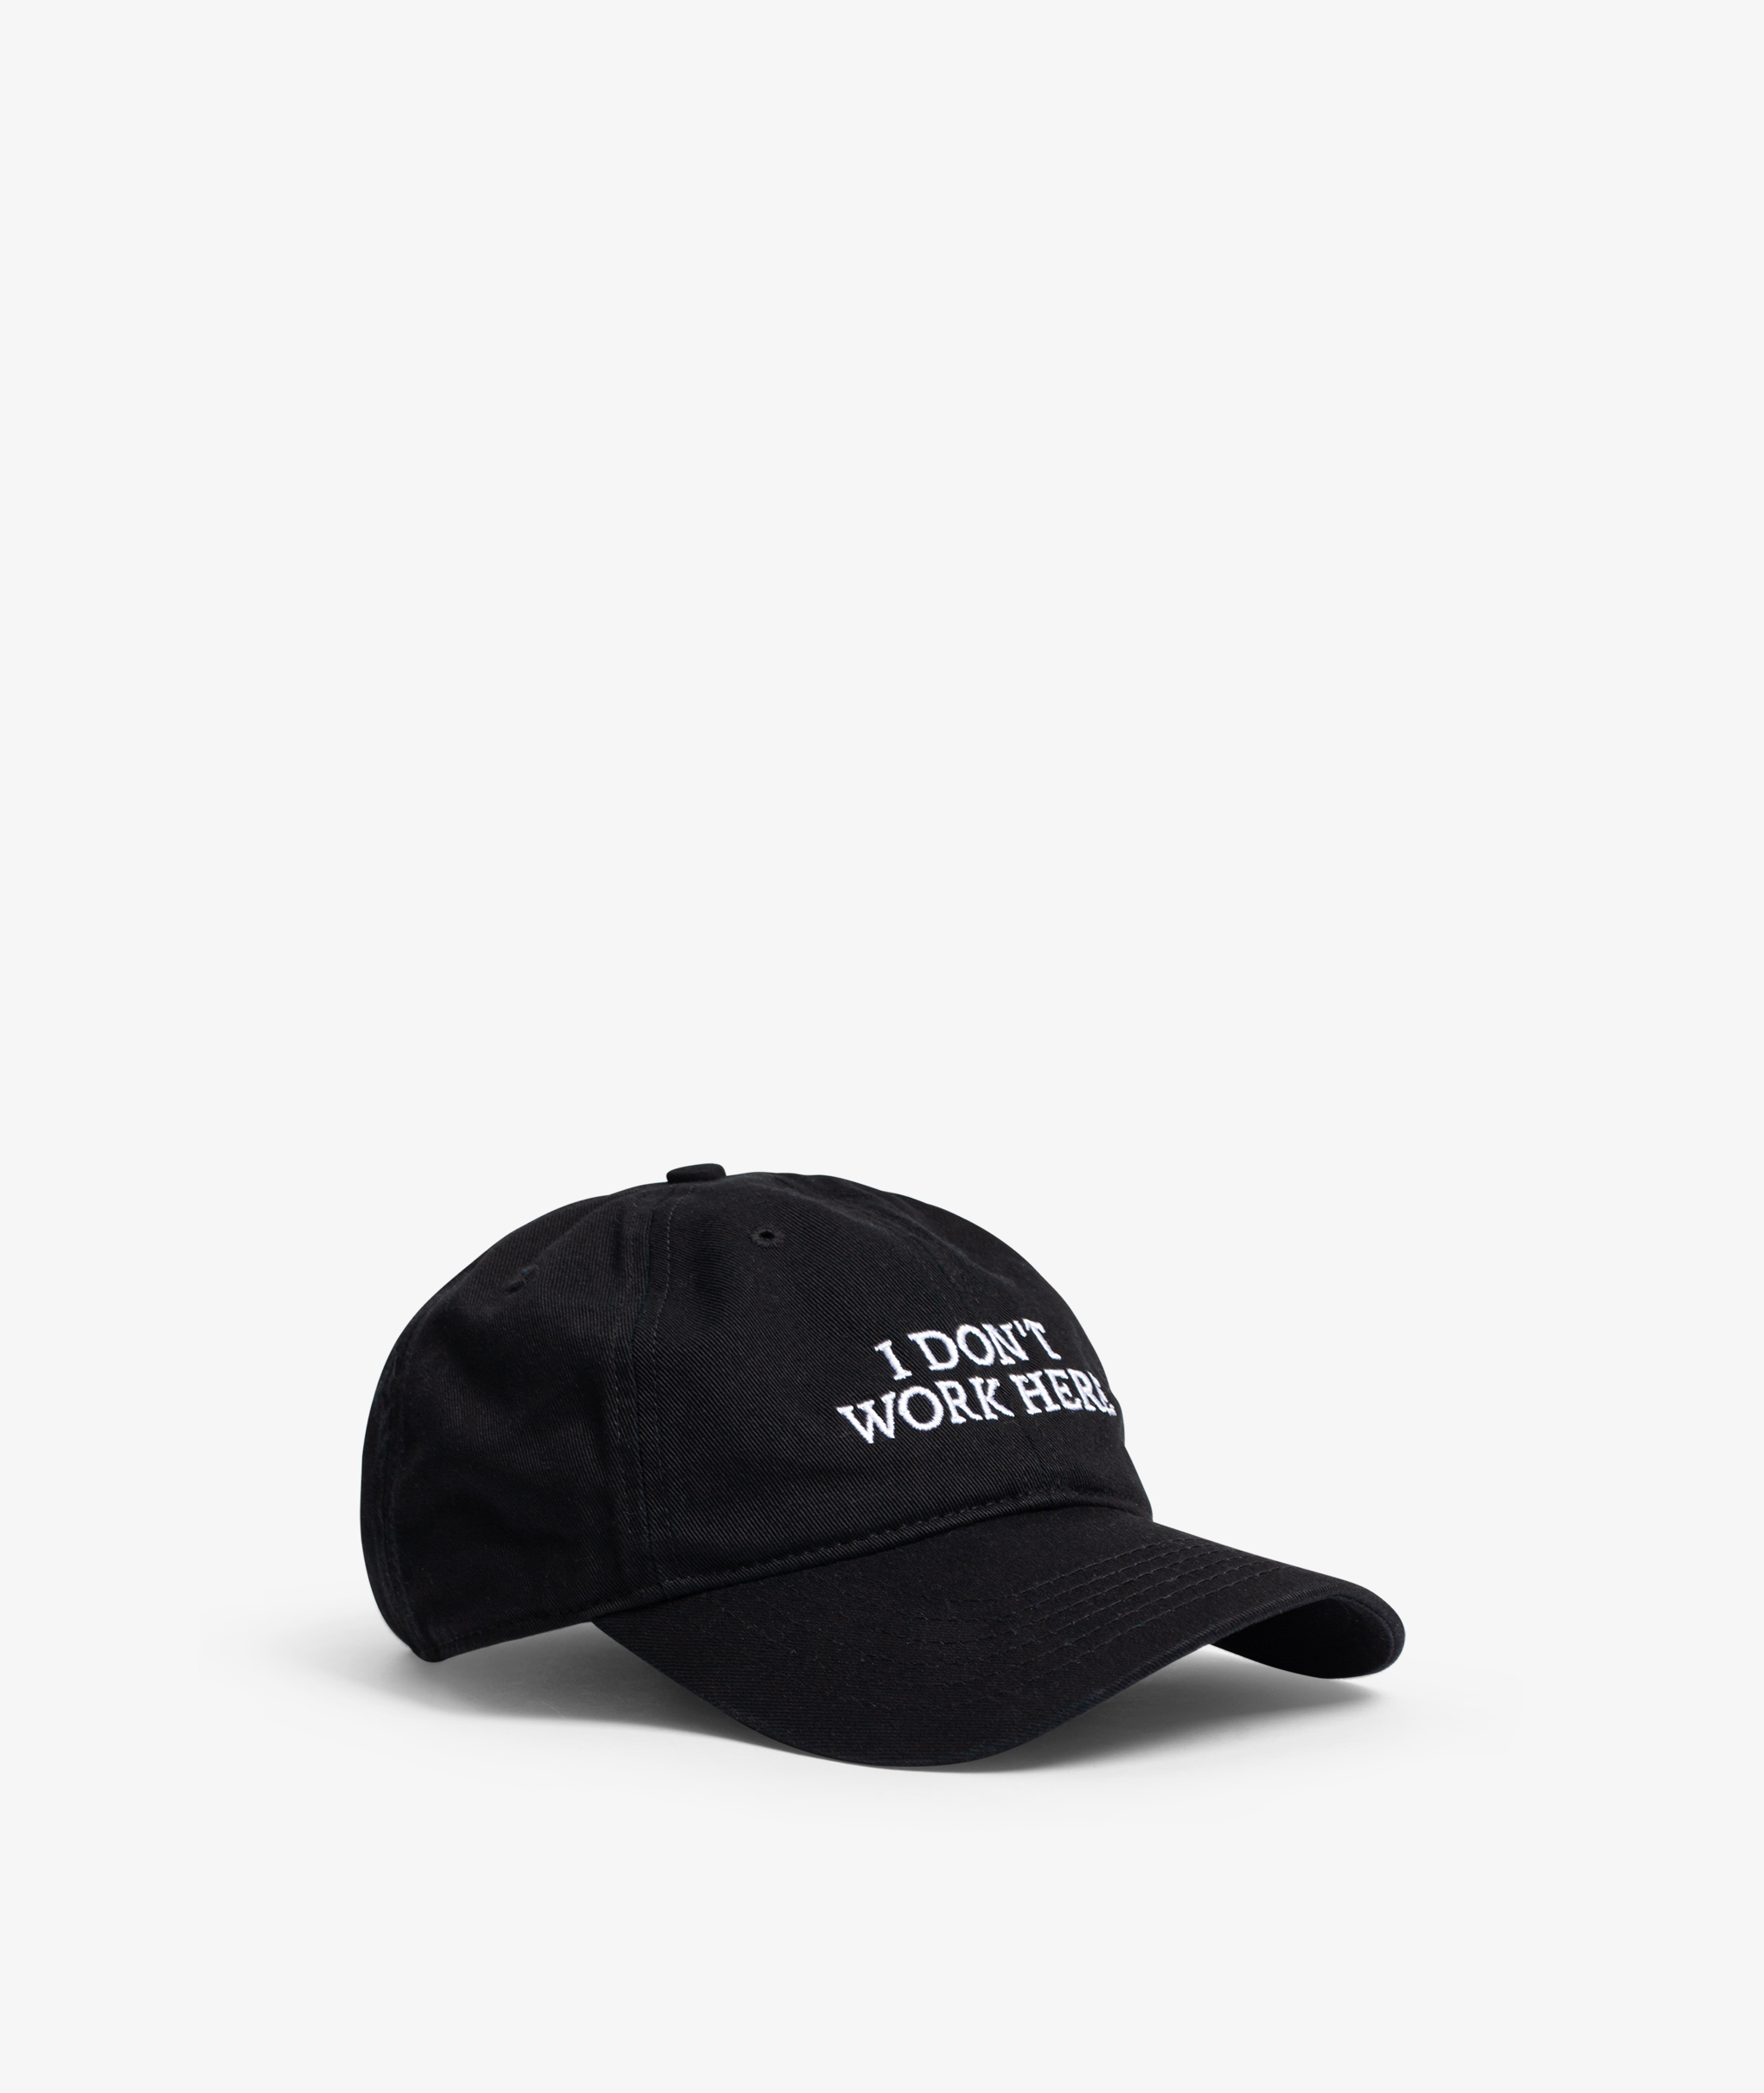 Norse Store | Shipping Worldwide - IDEA Sorry I don't work here Hat - Black